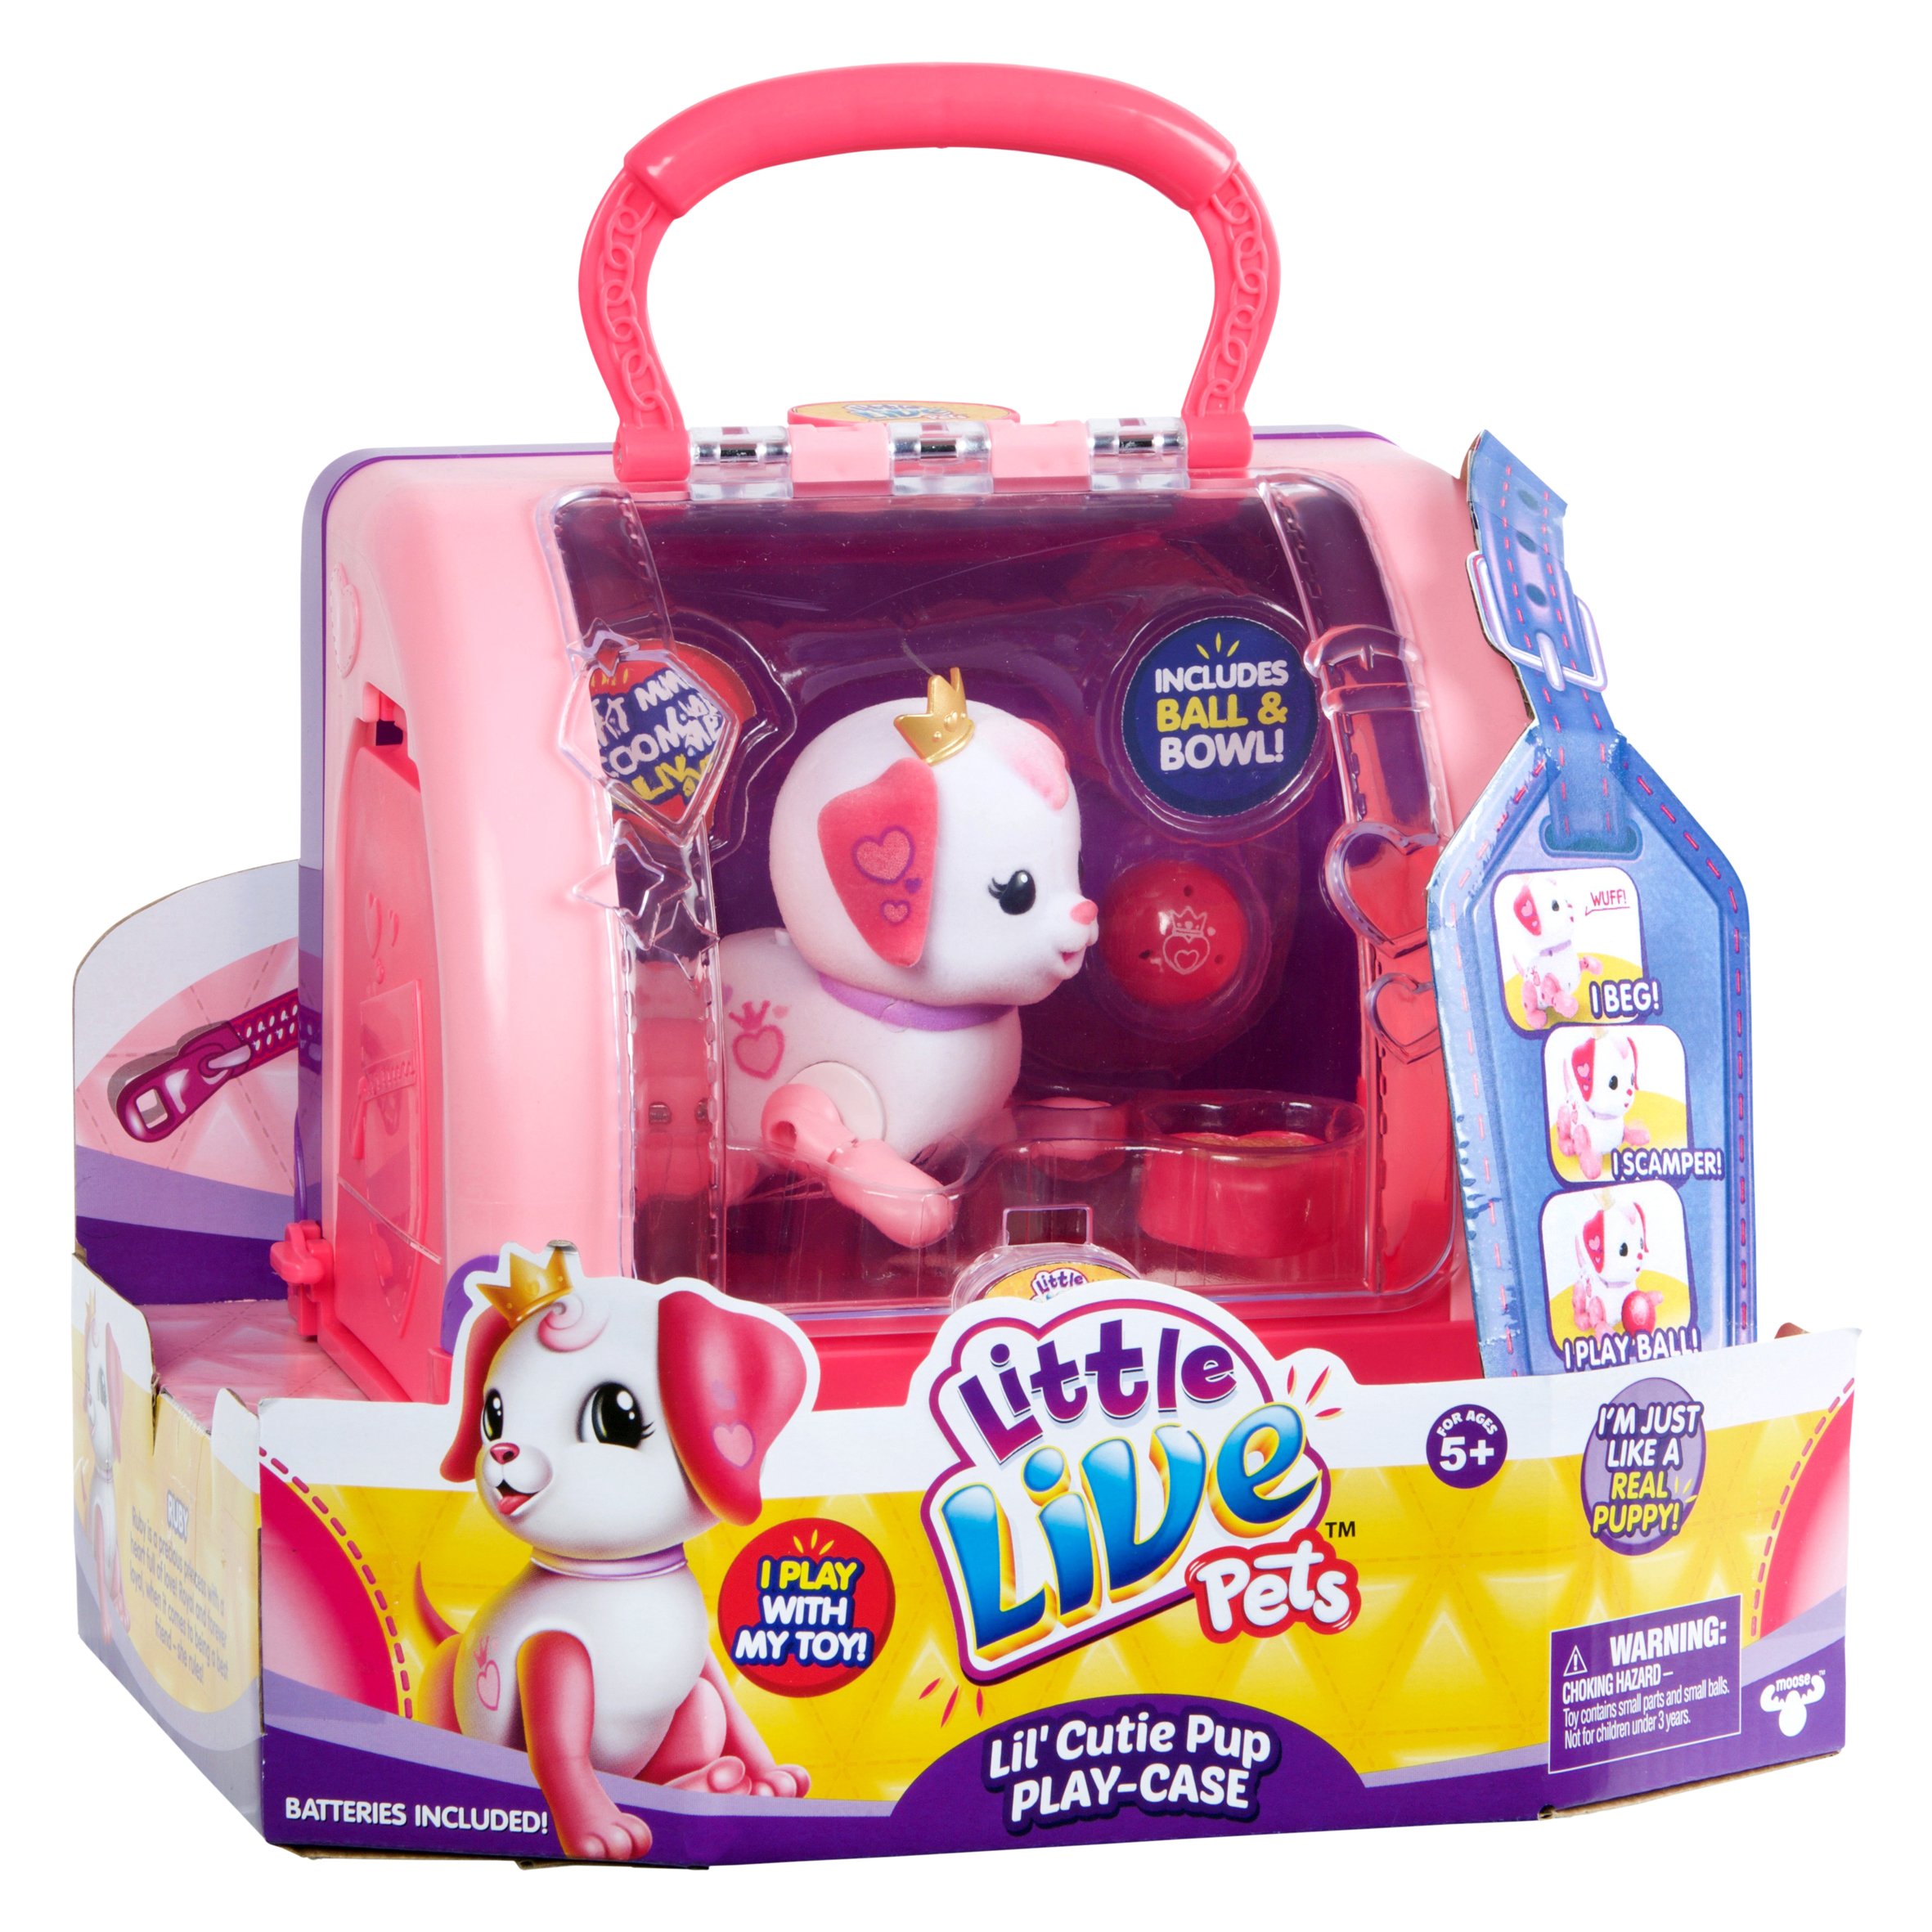 Little Live Pets S1 Cutie Pup Playset - Ruby LLP